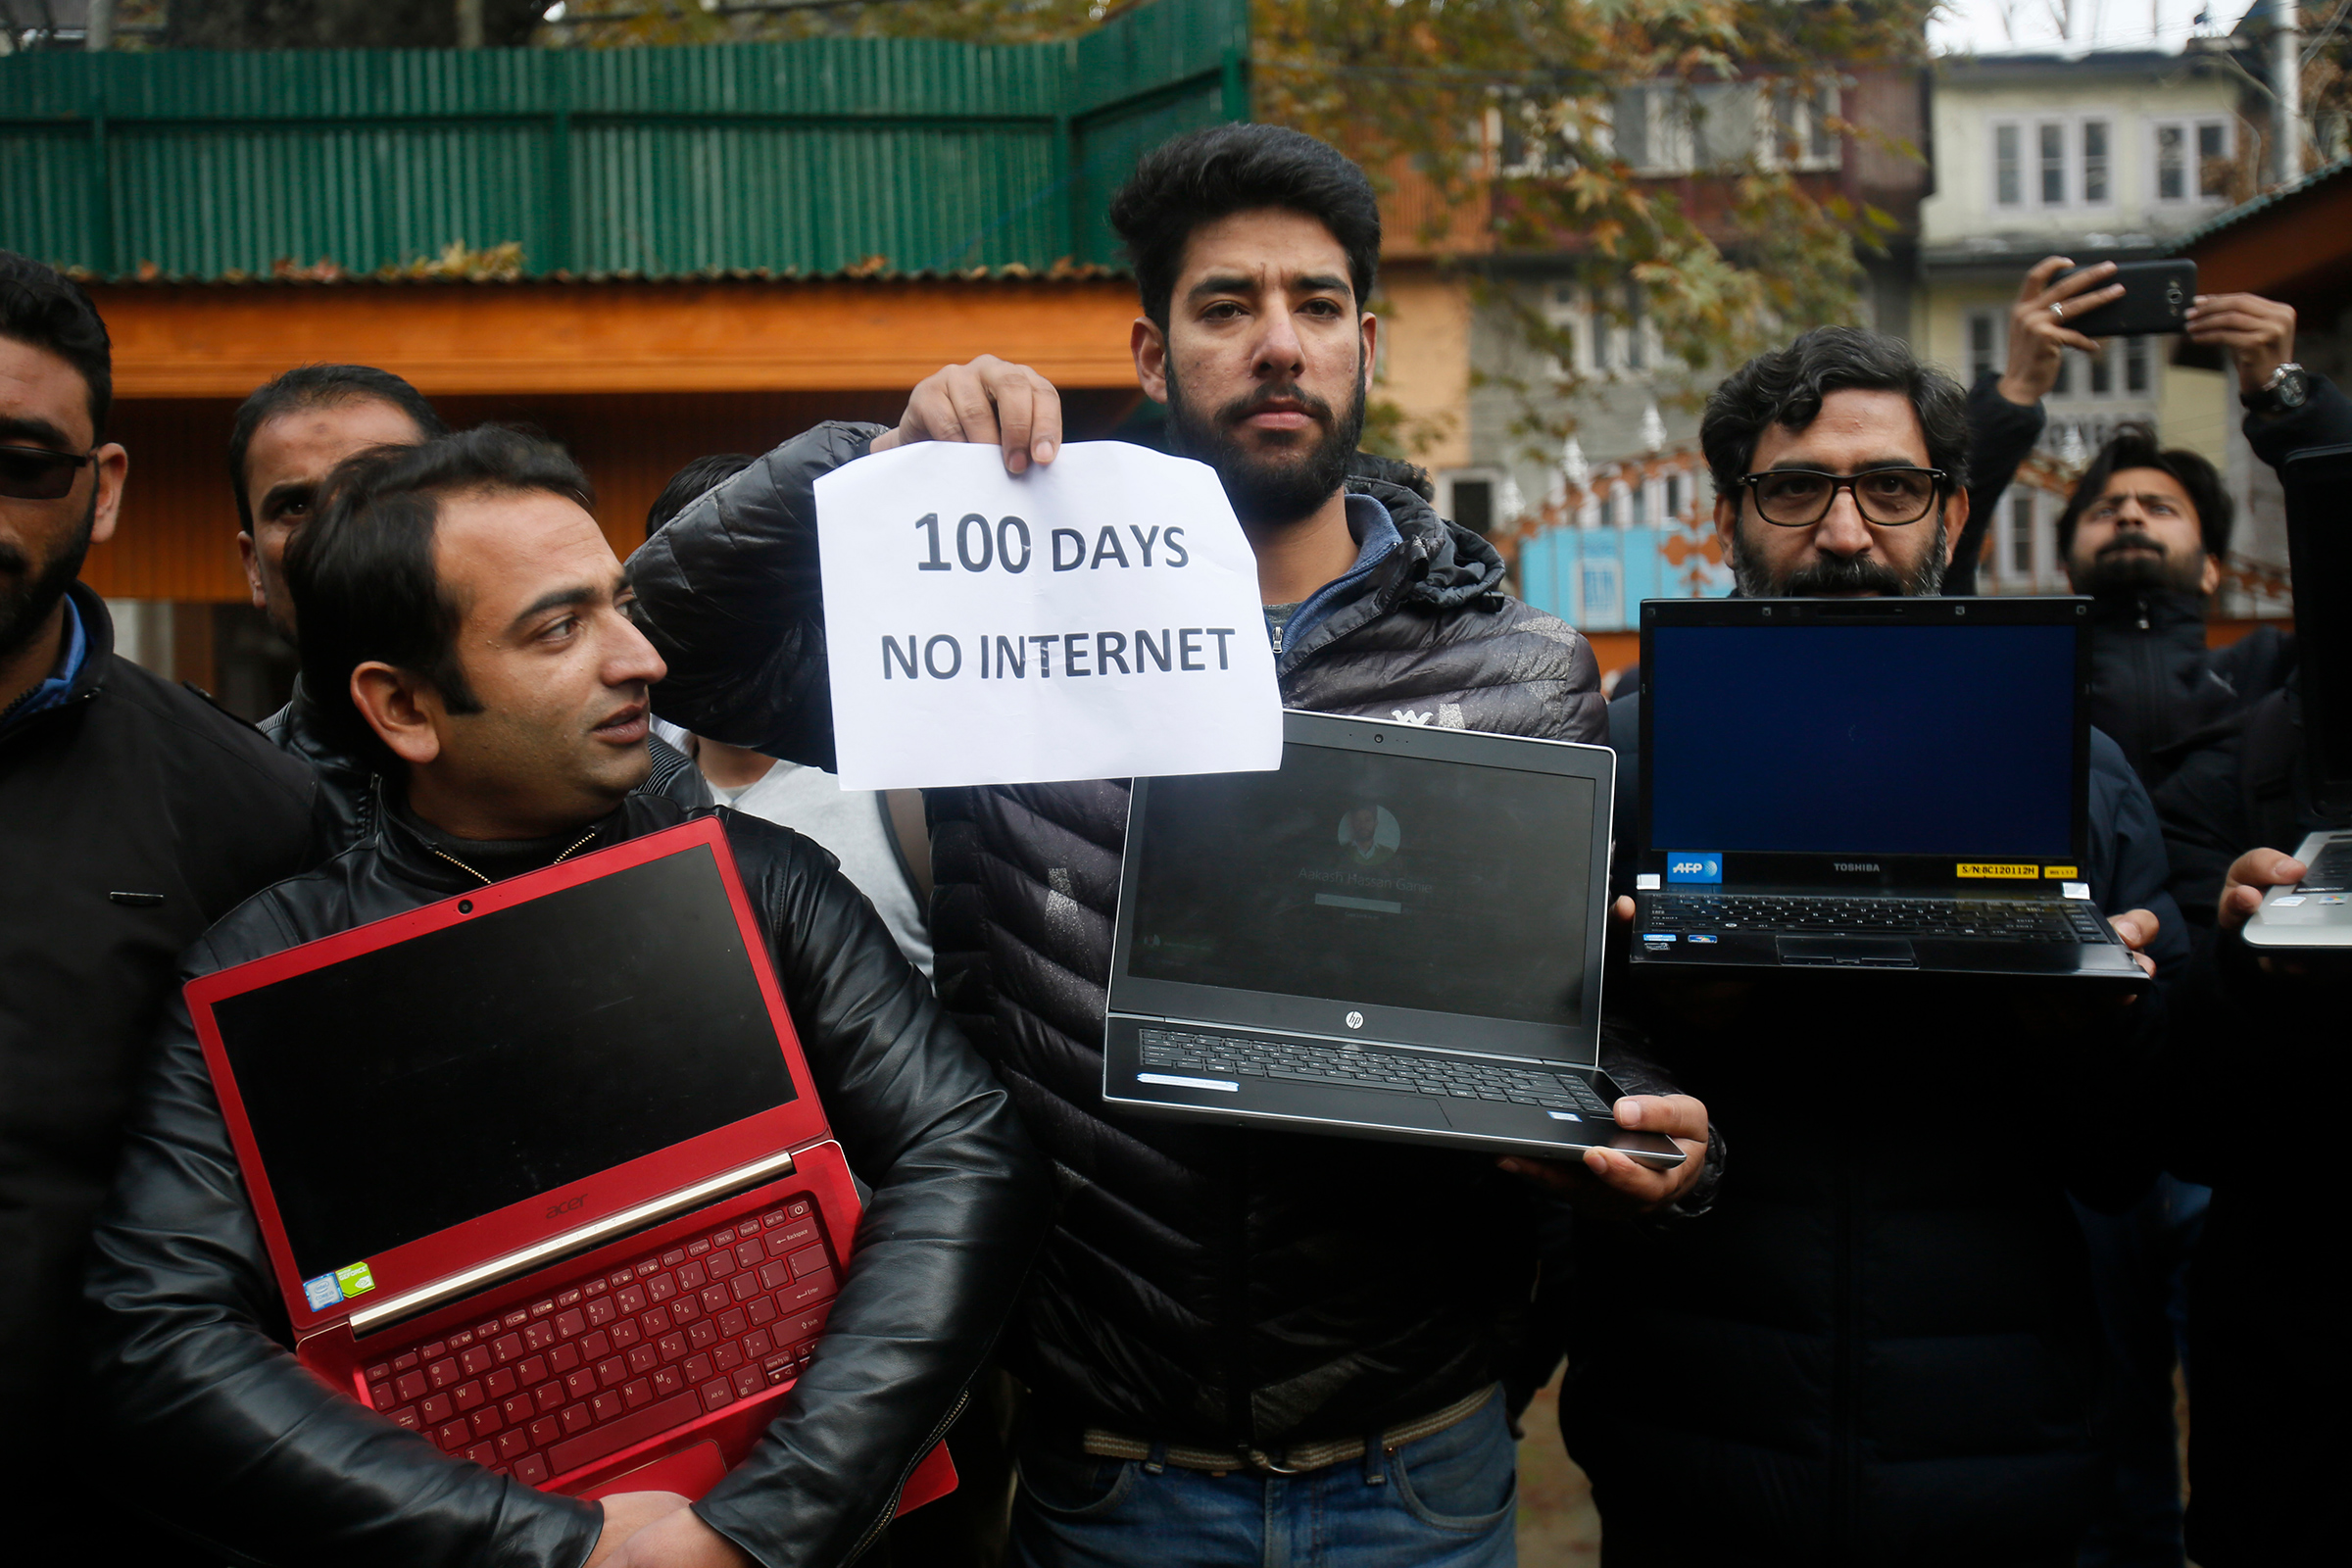 Kashmiri journalists hold placards and protest against 100 days of internet blockade in the region in Srinagar, Indian controlled Kashmir, on Nov. 12, 2019. Internet services have been cut since Aug. 5 when Indian-controlled Kashmir's semi-autonomous status was removed.  (Mukhtar Khan—AP)